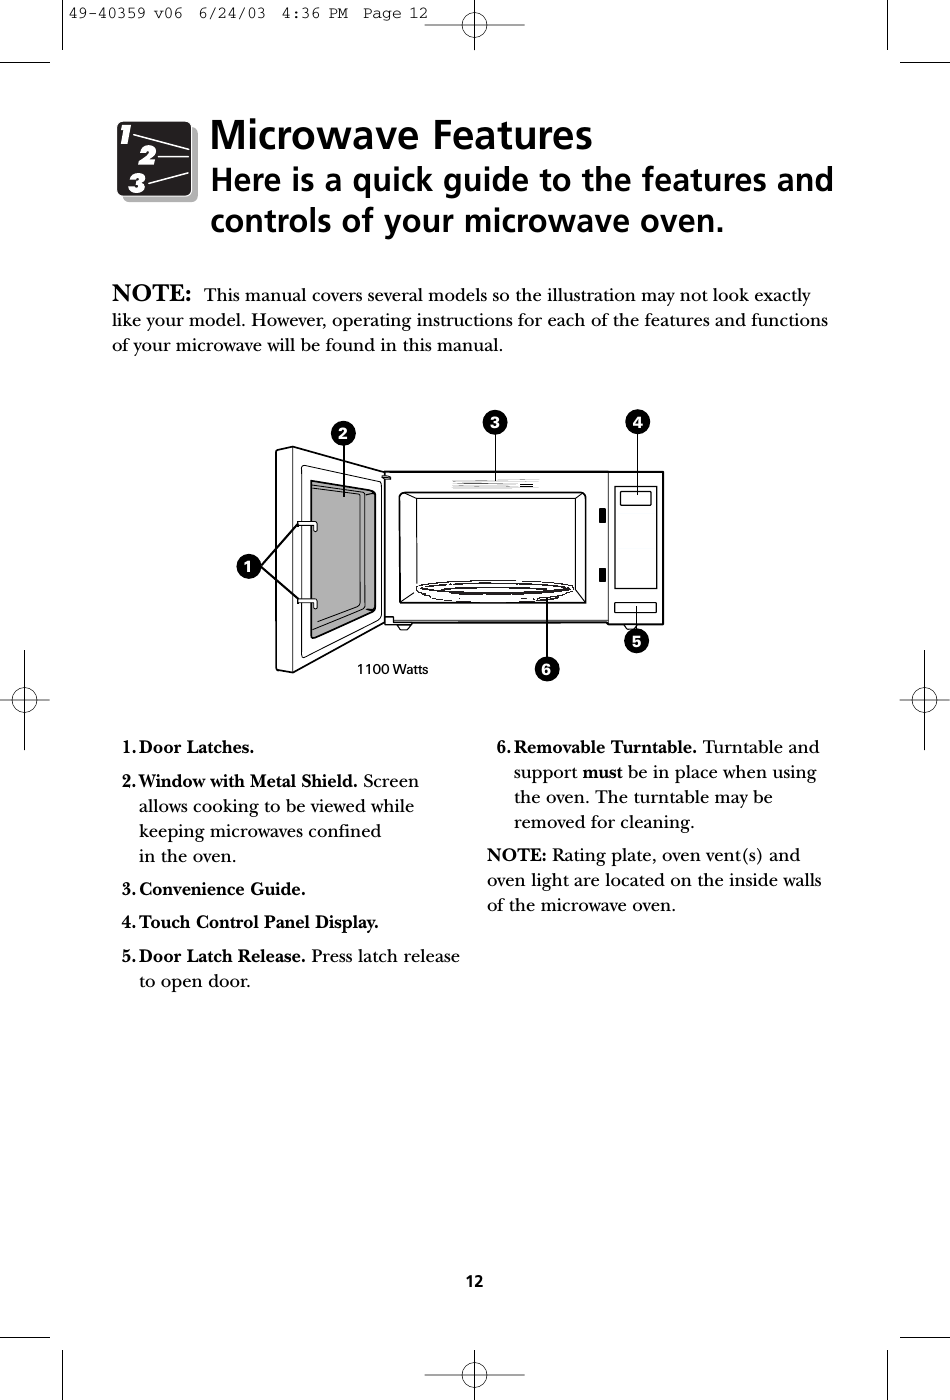 134256121100 Watts1.Door Latches.2. Window with Metal Shield. Screenallows cooking to be viewed whilekeeping microwaves confined in the oven.3. Convenience Guide.4. Touch Control Panel Display.5. Door Latch Release. Press latch releaseto open door.6. Removable Turntable. Turntable andsupport must be in place when usingthe oven. The turntable may beremoved for cleaning.NOTE: Rating plate, oven vent(s) andoven light are located on the inside wallsof the microwave oven.NOTE: This manual covers several models so the illustration may not look exactlylike your model. However, operating instructions for each of the features and functionsof your microwave will be found in this manual.Microwave FeaturesHere is a quick guide to the features andcontrols of your microwave oven.49-40359 v06  6/24/03  4:36 PM  Page 12